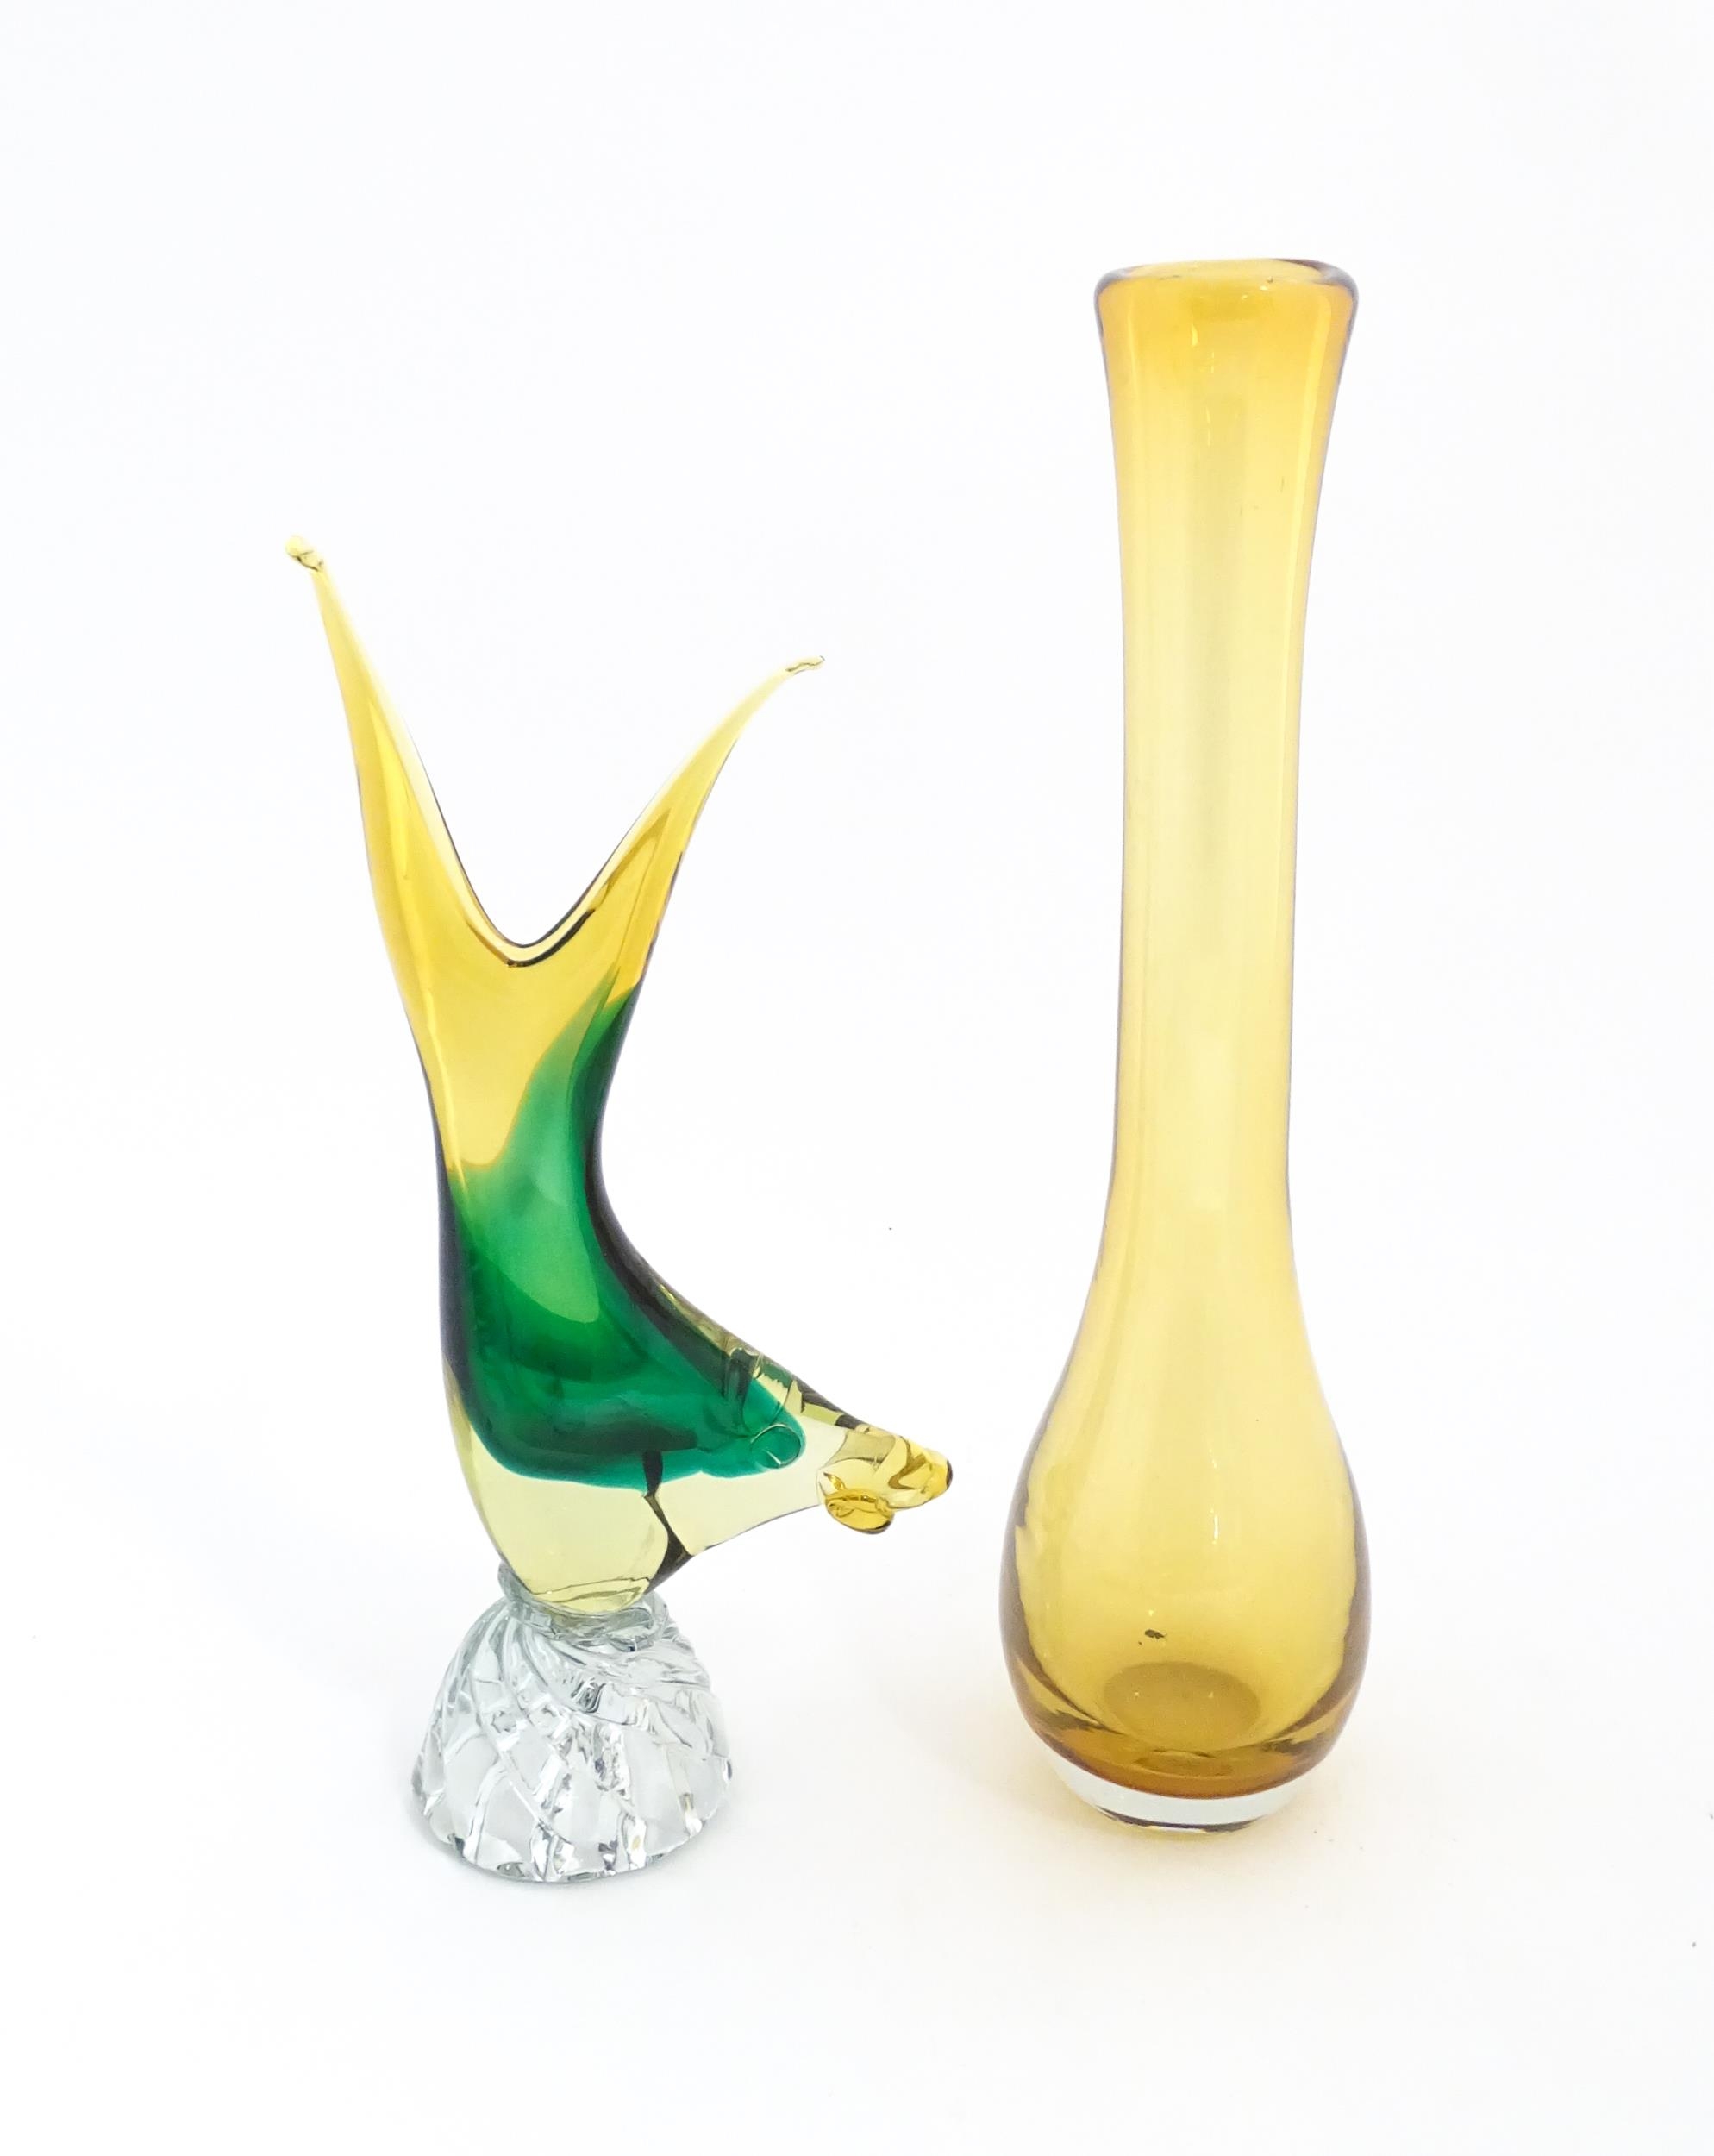 A Murano style glass vase modelled as a fish. Together with a studio glass vase of elongated form.